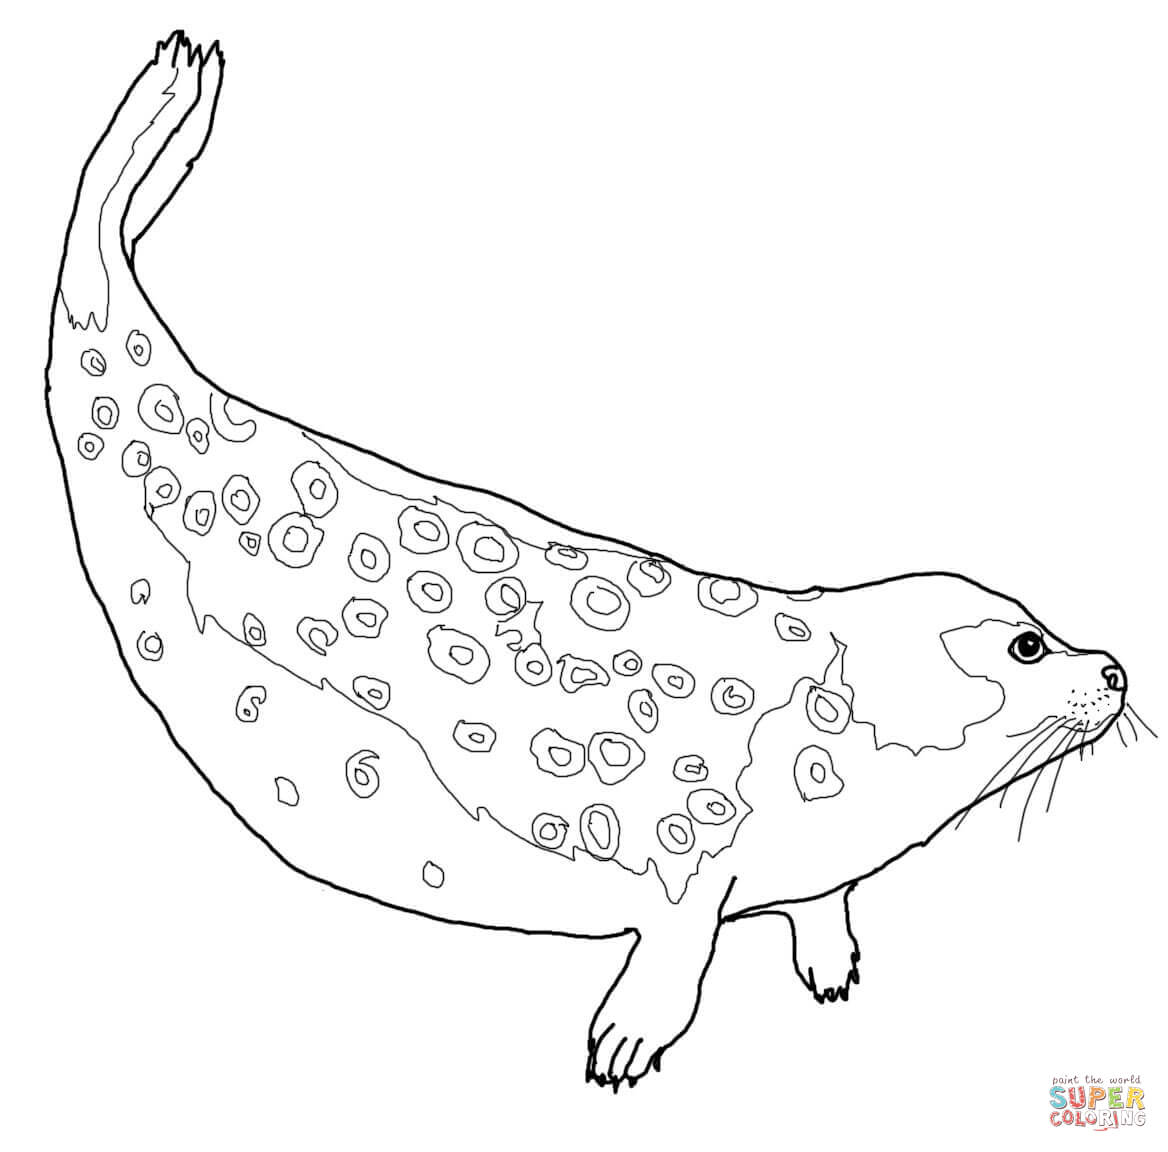 elephant seal coloring download elephant seal coloring